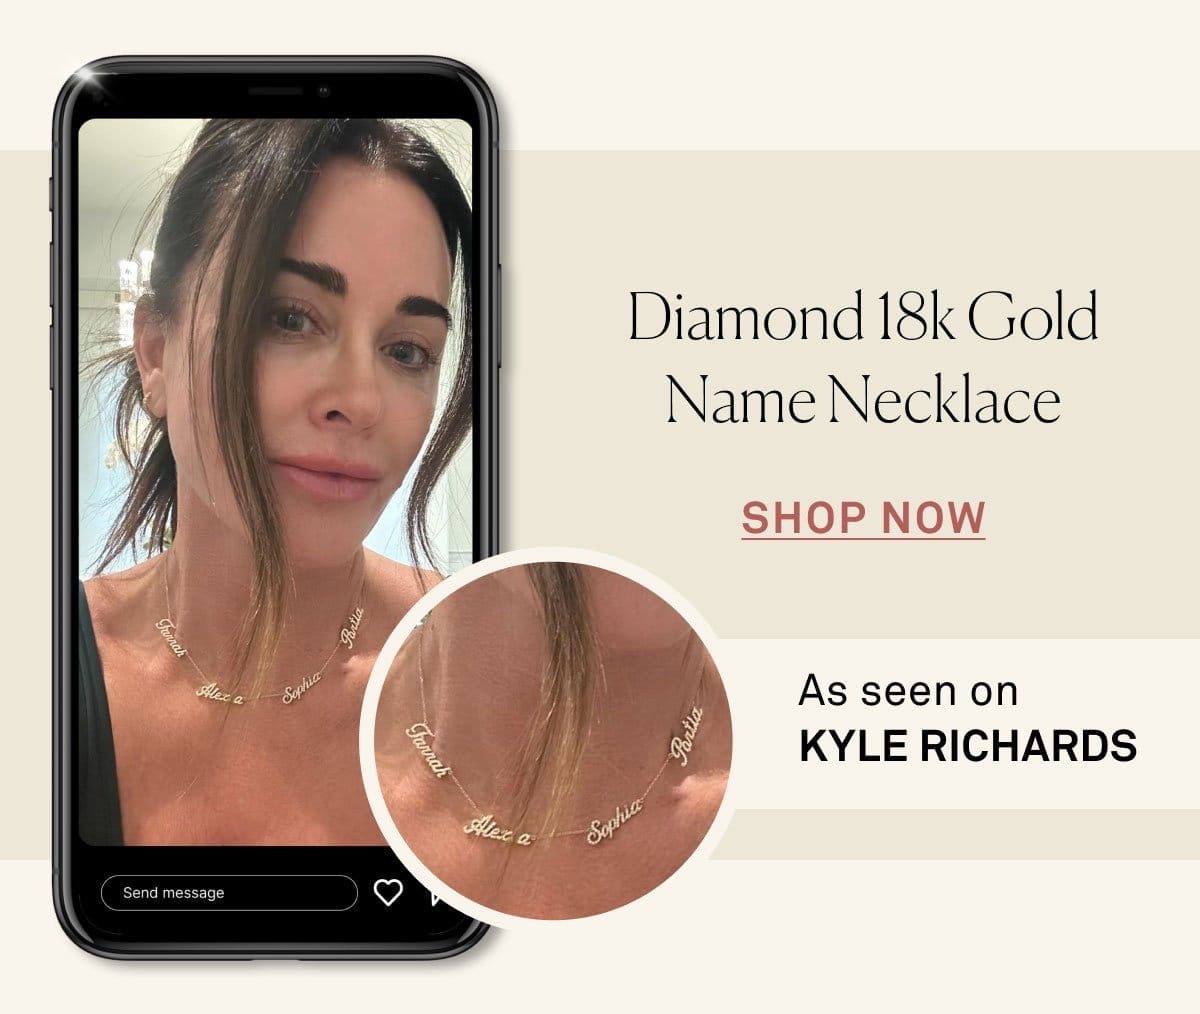 As seen on Kyle Richards